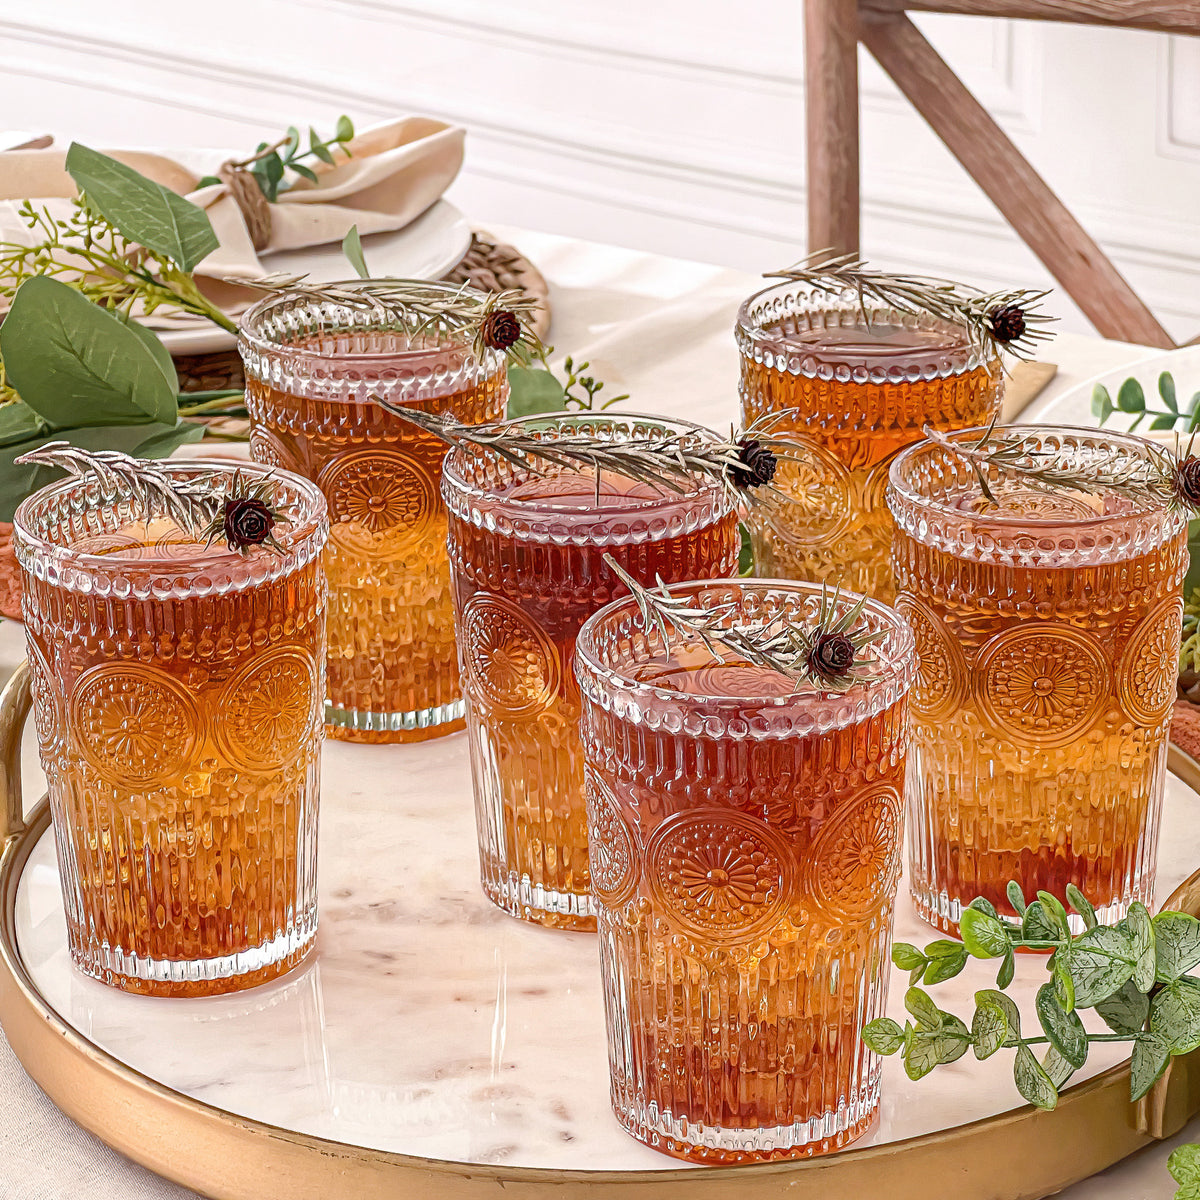 Livenza Drinking Glass, Set of 6 by Texture Designideas